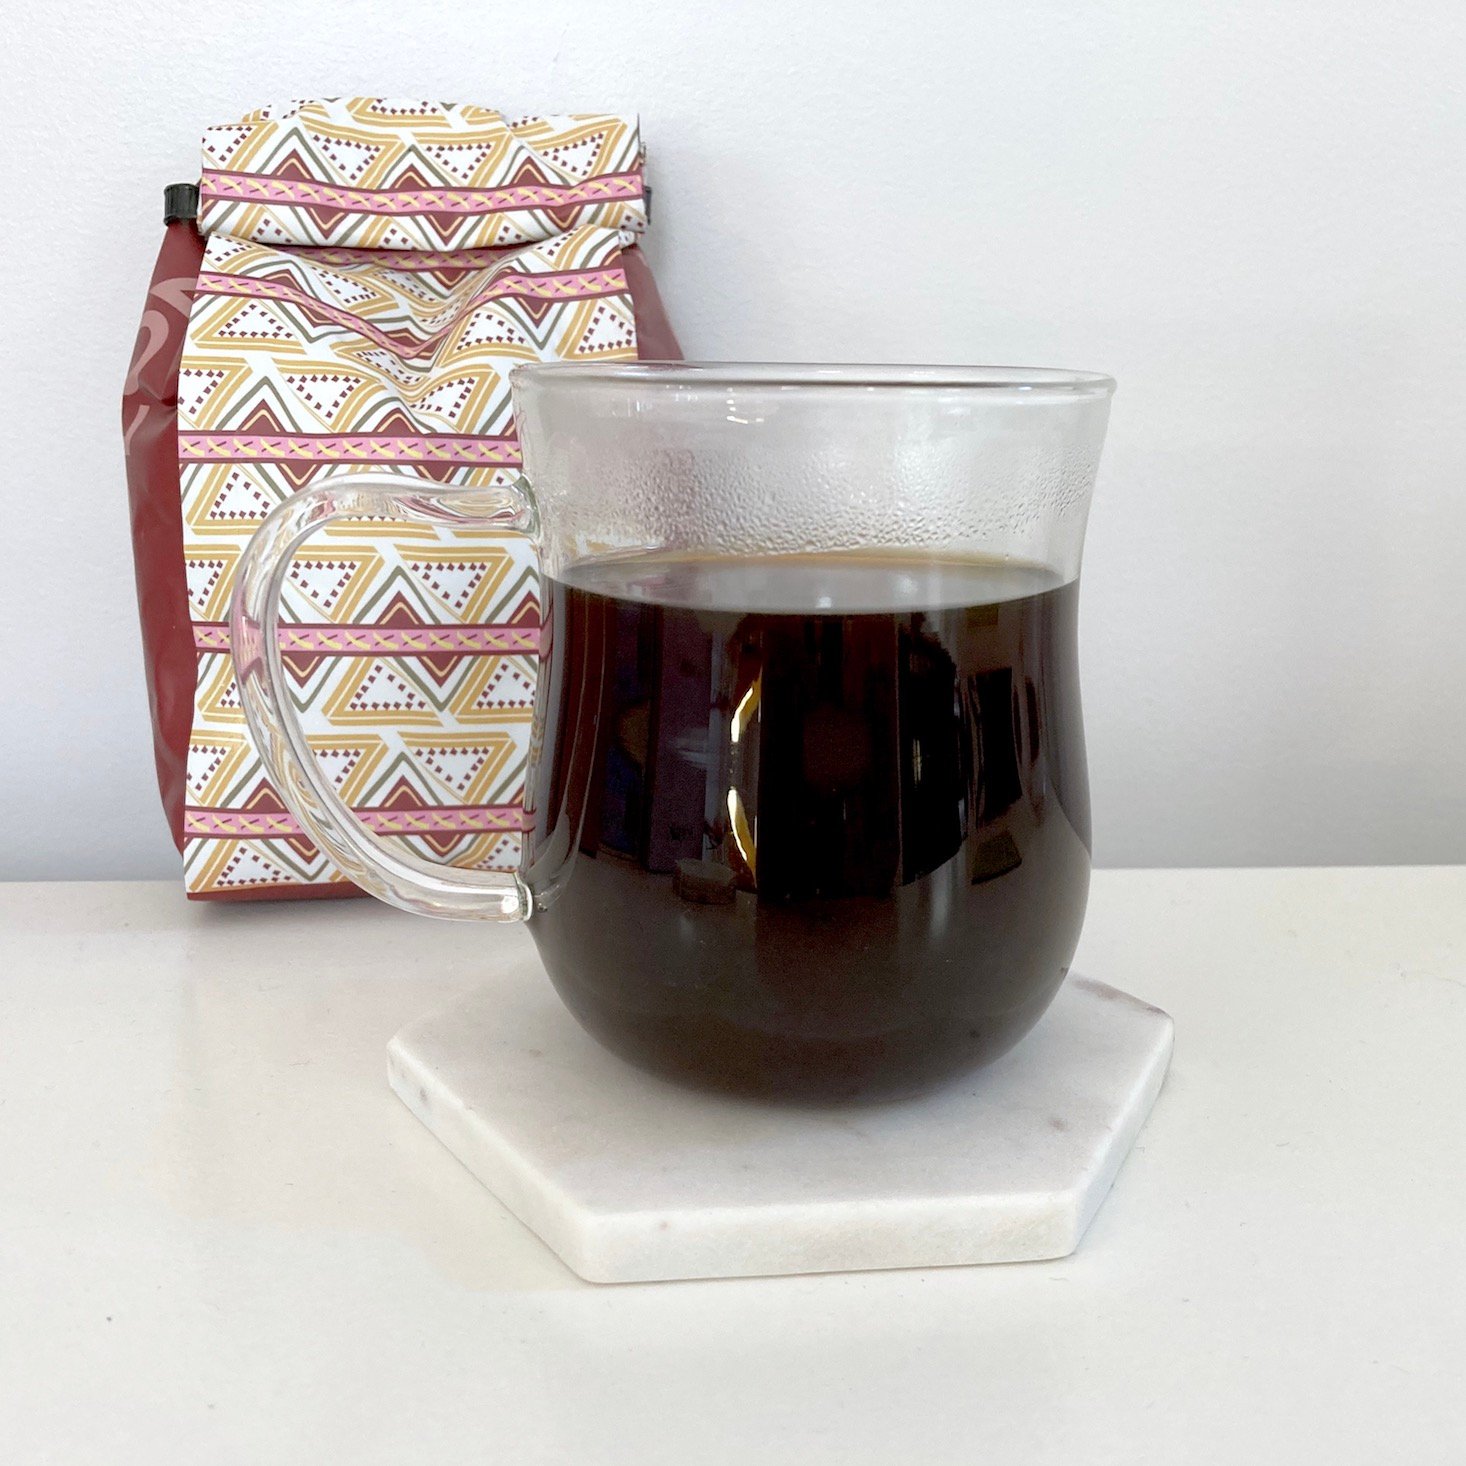 5 Affordable Ways to Keep Your Coffee Hot - Atlas Coffee Club